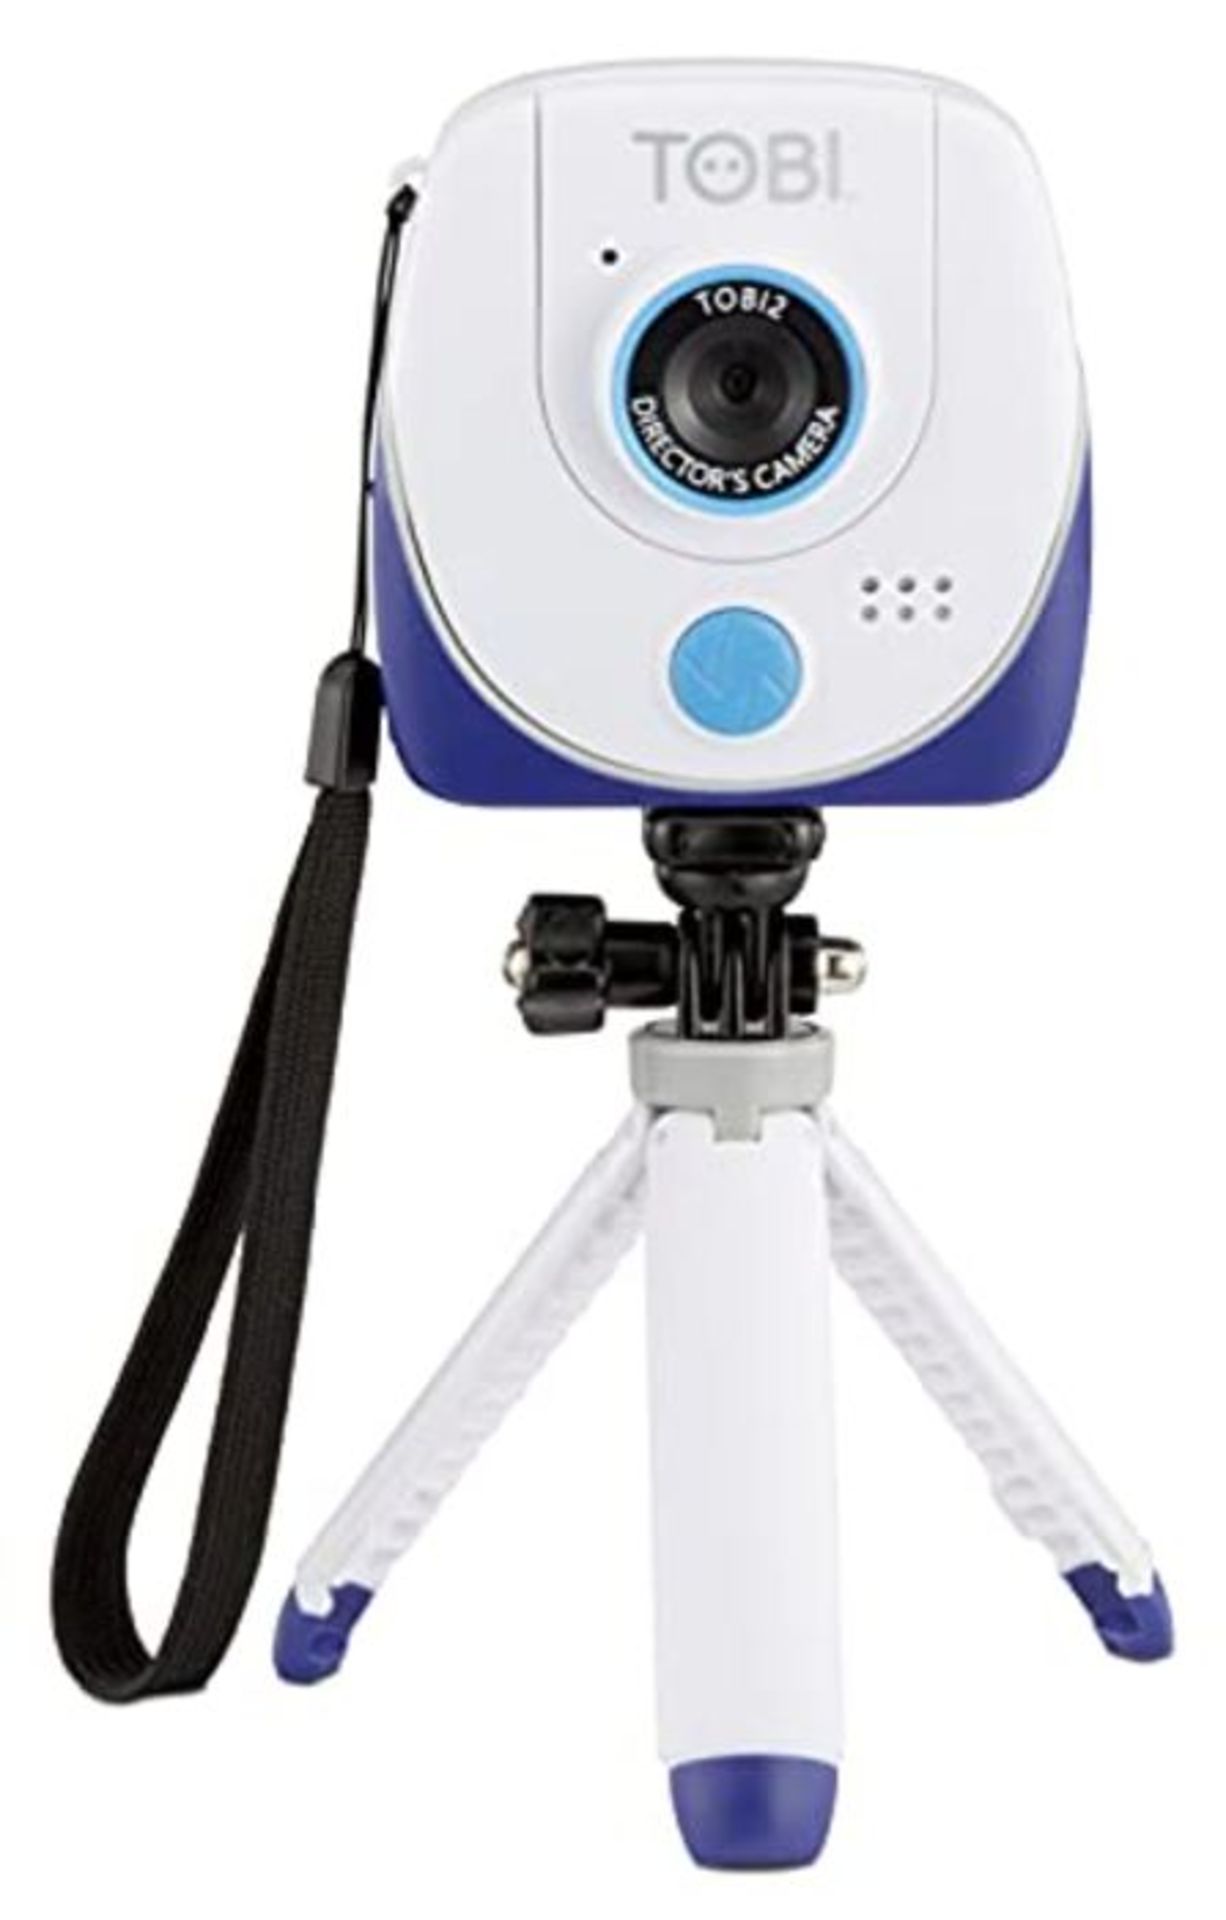 Little Tikes Tobi 2 Director?s Camera - For High Definition Photos & Videos - Special